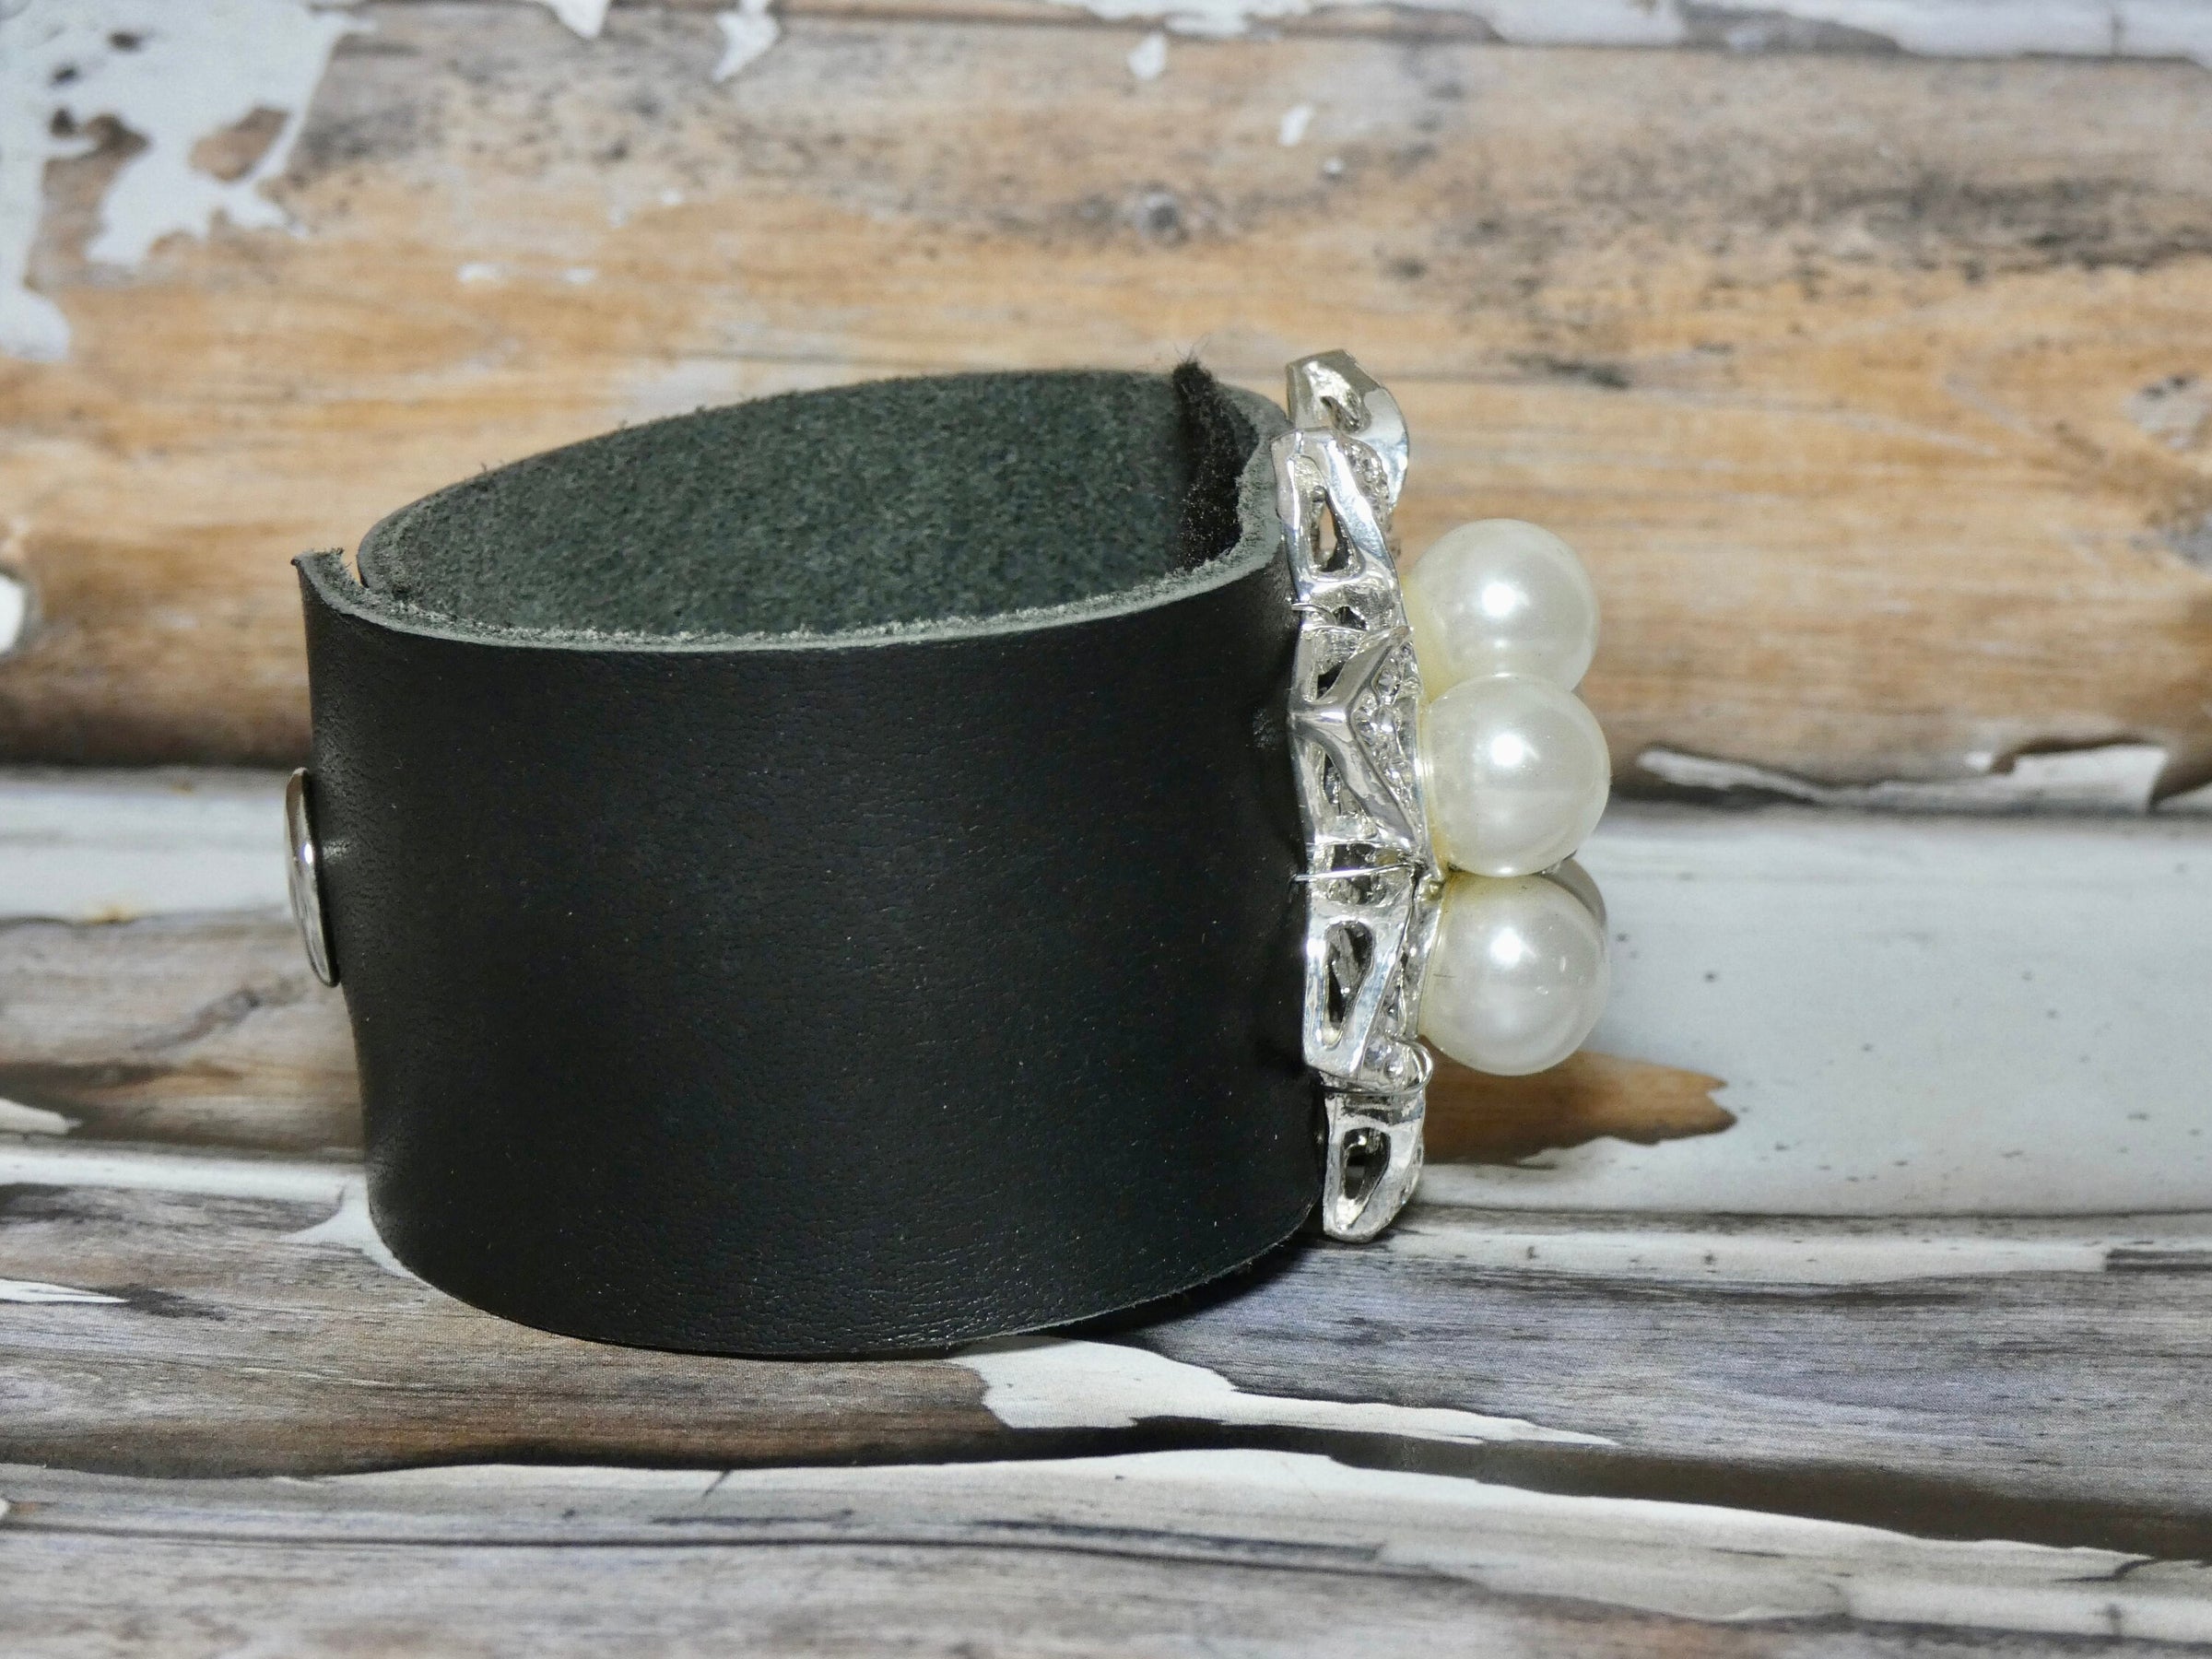 Leather Cuff Bracelet with a Repurposed Vintage Brooch, Silver and Pearl Flower Brooch